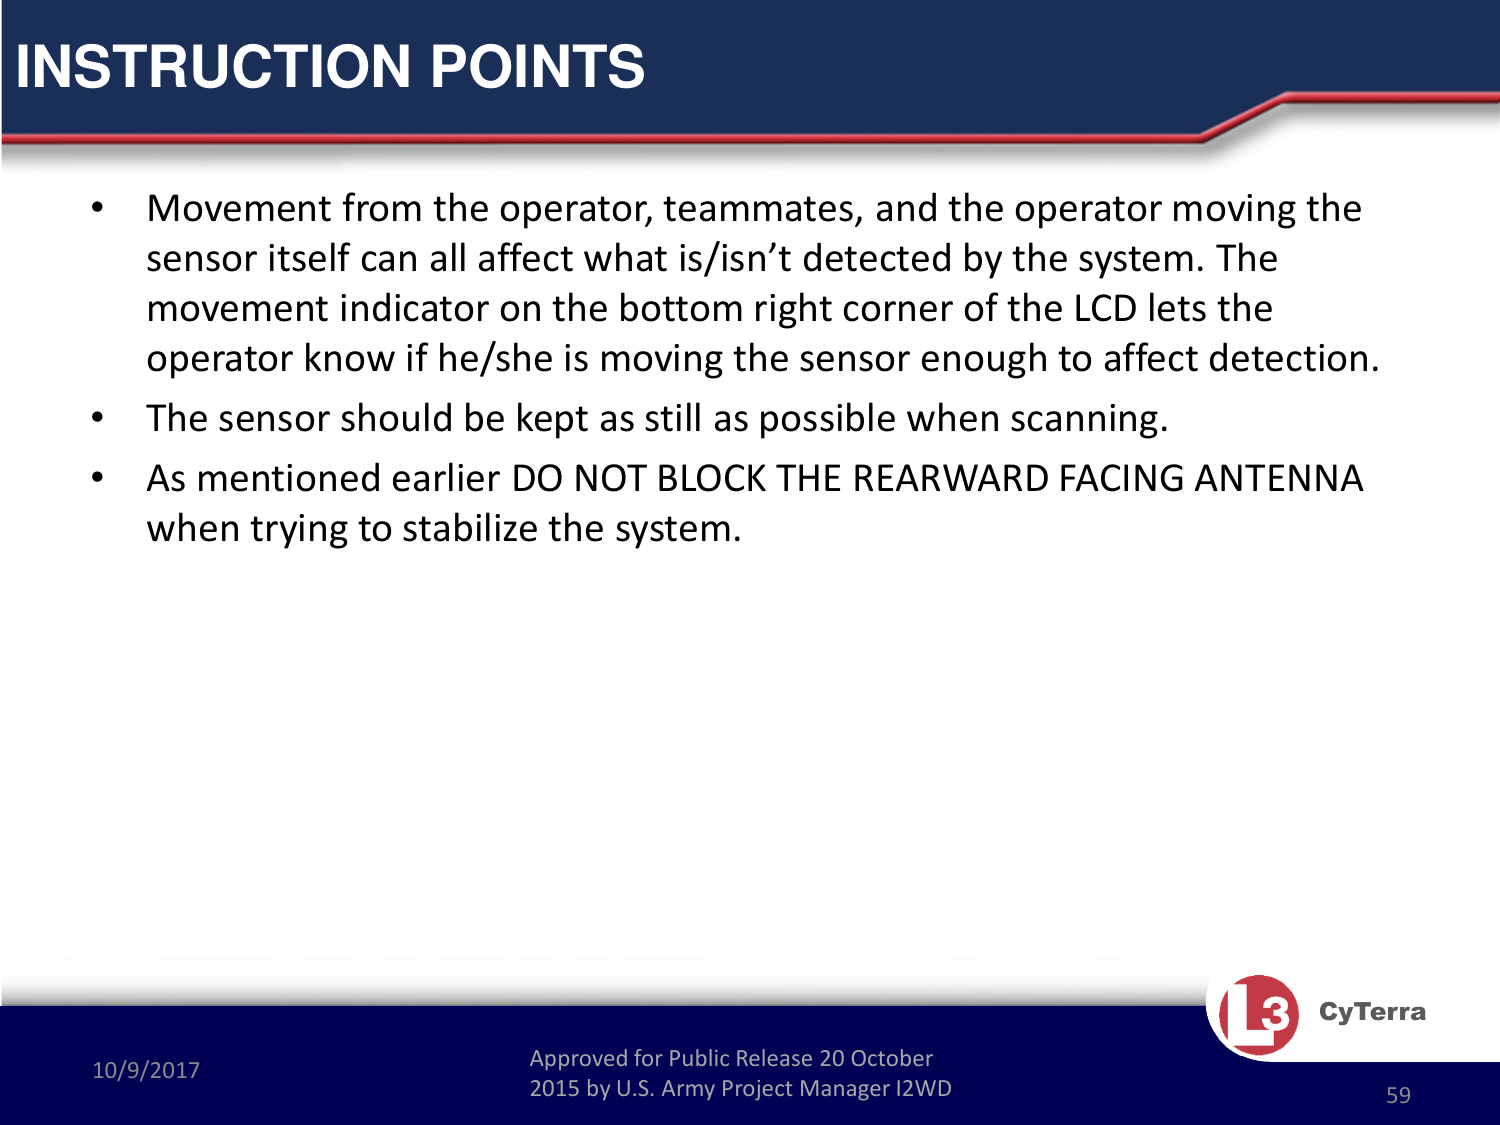 Approved for Public Release 20 October 2015 by U.S. Army Project Manager I2WD10/9/2017 Approved for Public Release 20 October 2015 by U.S. Army Project Manager I2WD 59CyTerra•Movement from the operator, teammates, and the operator moving the sensor itself can all affect what is/isn’t detected by the system. The movement indicator on the bottom right corner of the LCD lets the operator know if he/she is moving the sensor enough to affect detection. •The sensor should be kept as still as possible when scanning. •As mentioned earlier DO NOT BLOCK THE REARWARD FACING ANTENNA when trying to stabilize the system.INSTRUCTION POINTS